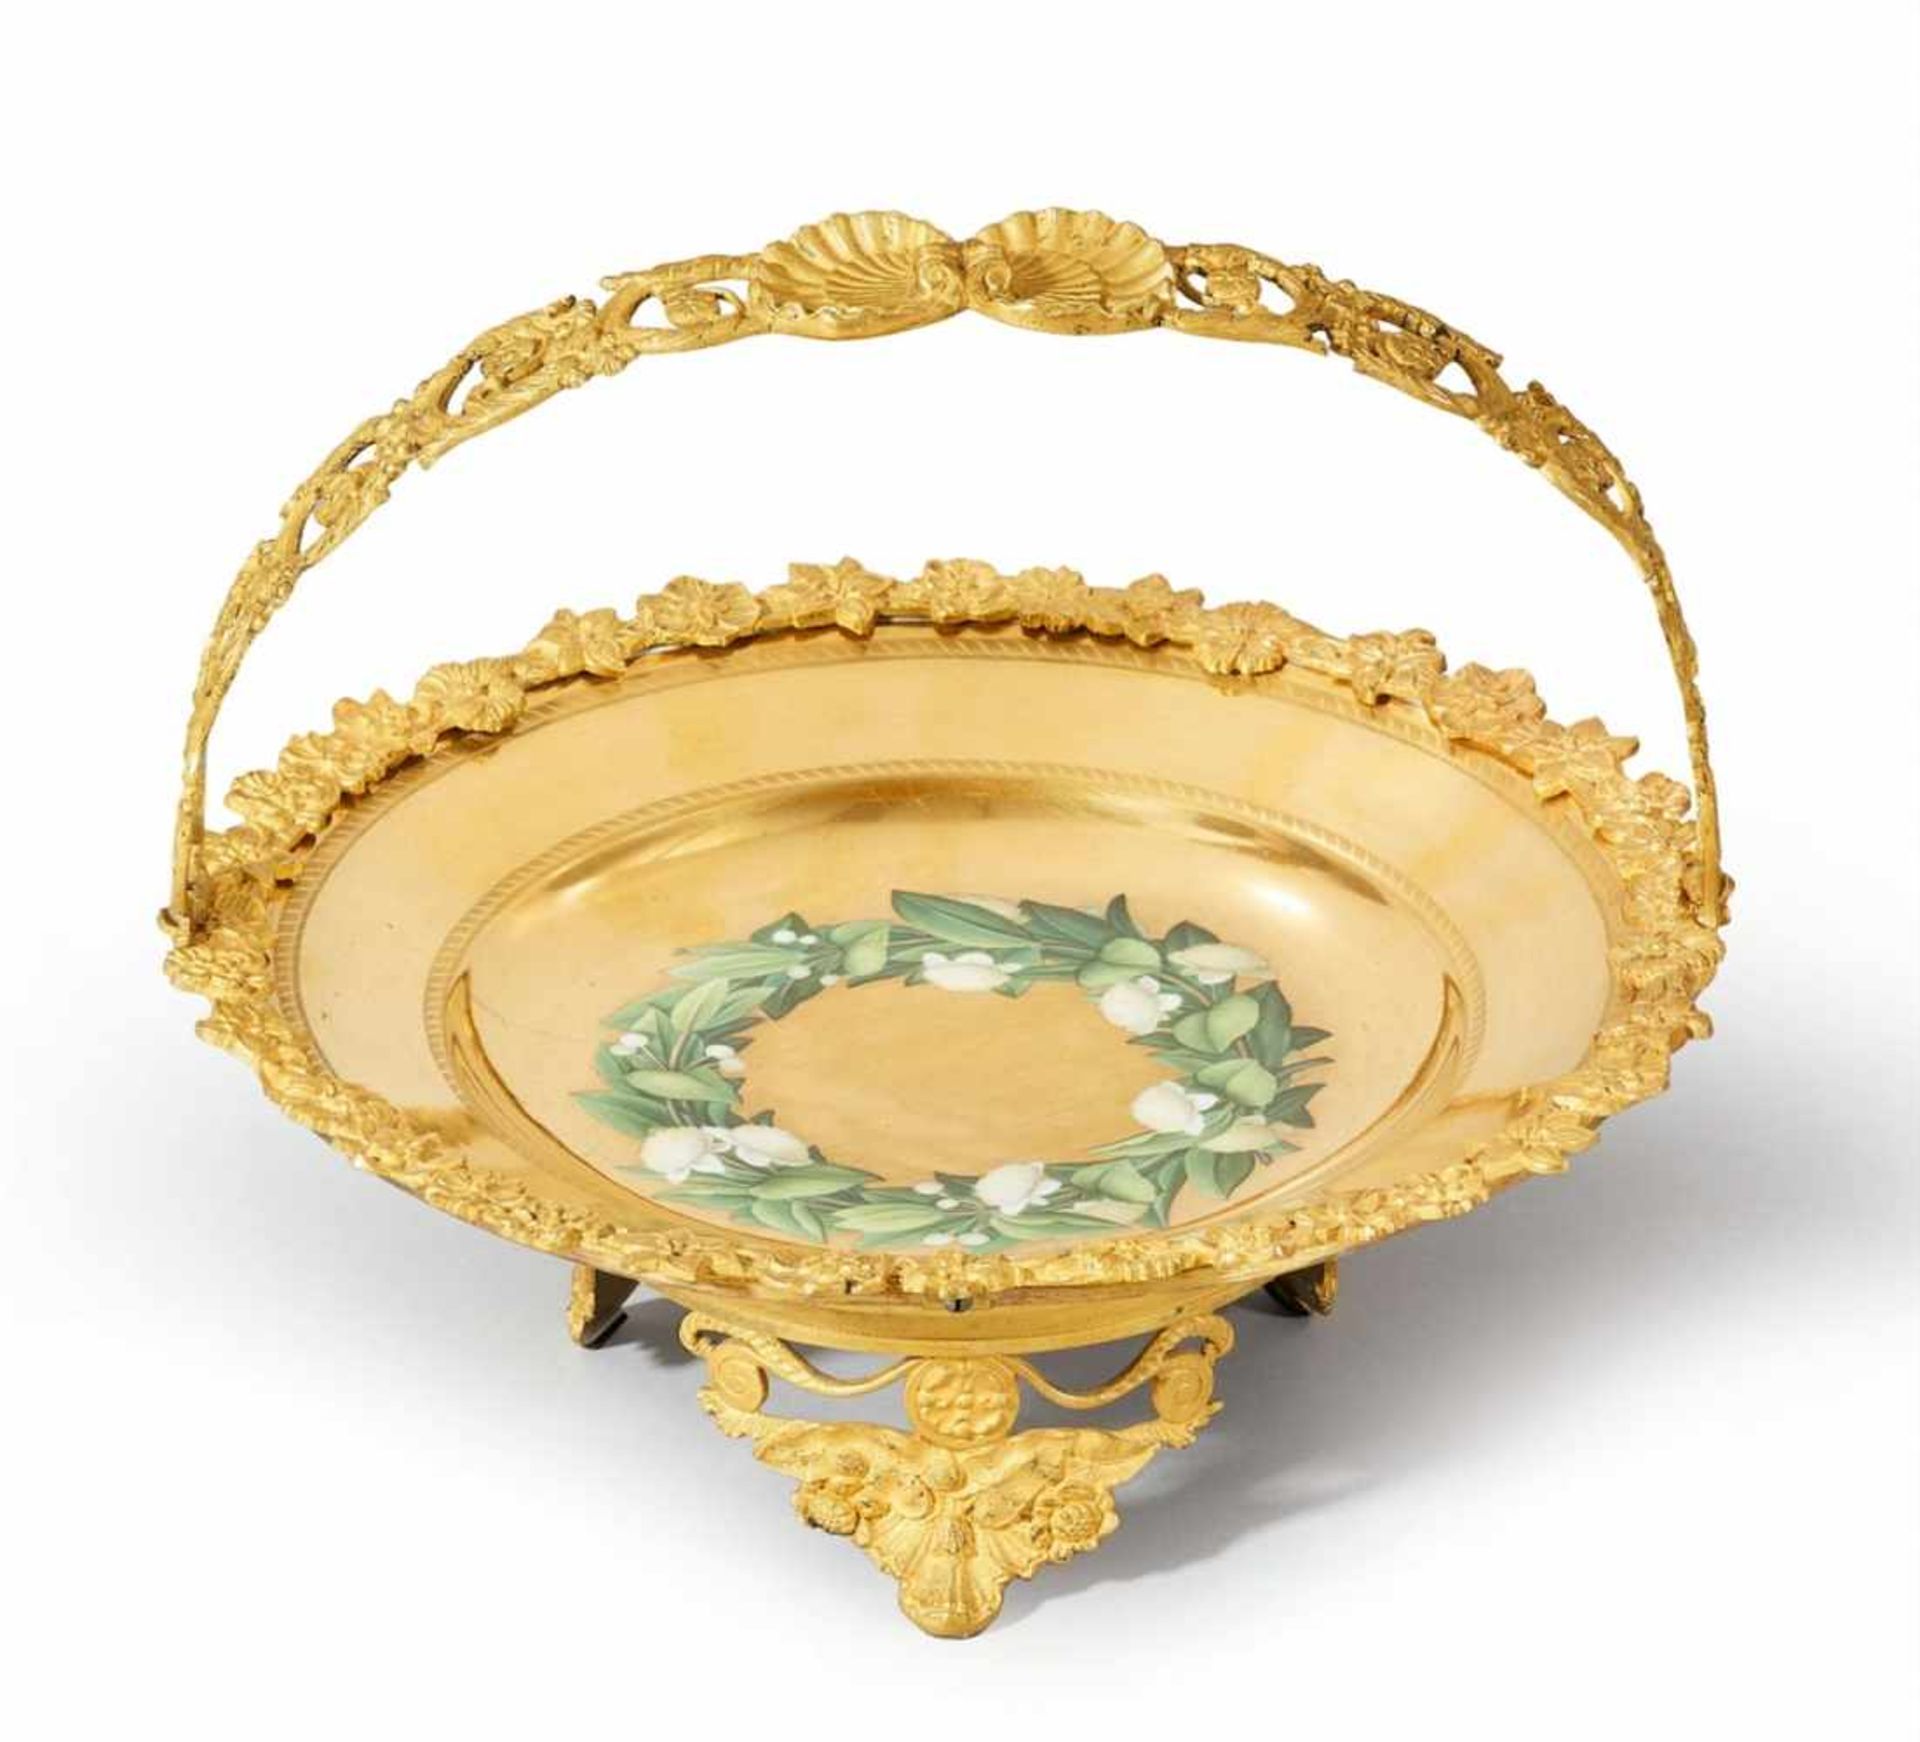 A Berlin KPM porcelain plate with bronze mountingsModel no. 1084. The well decorated with a finely